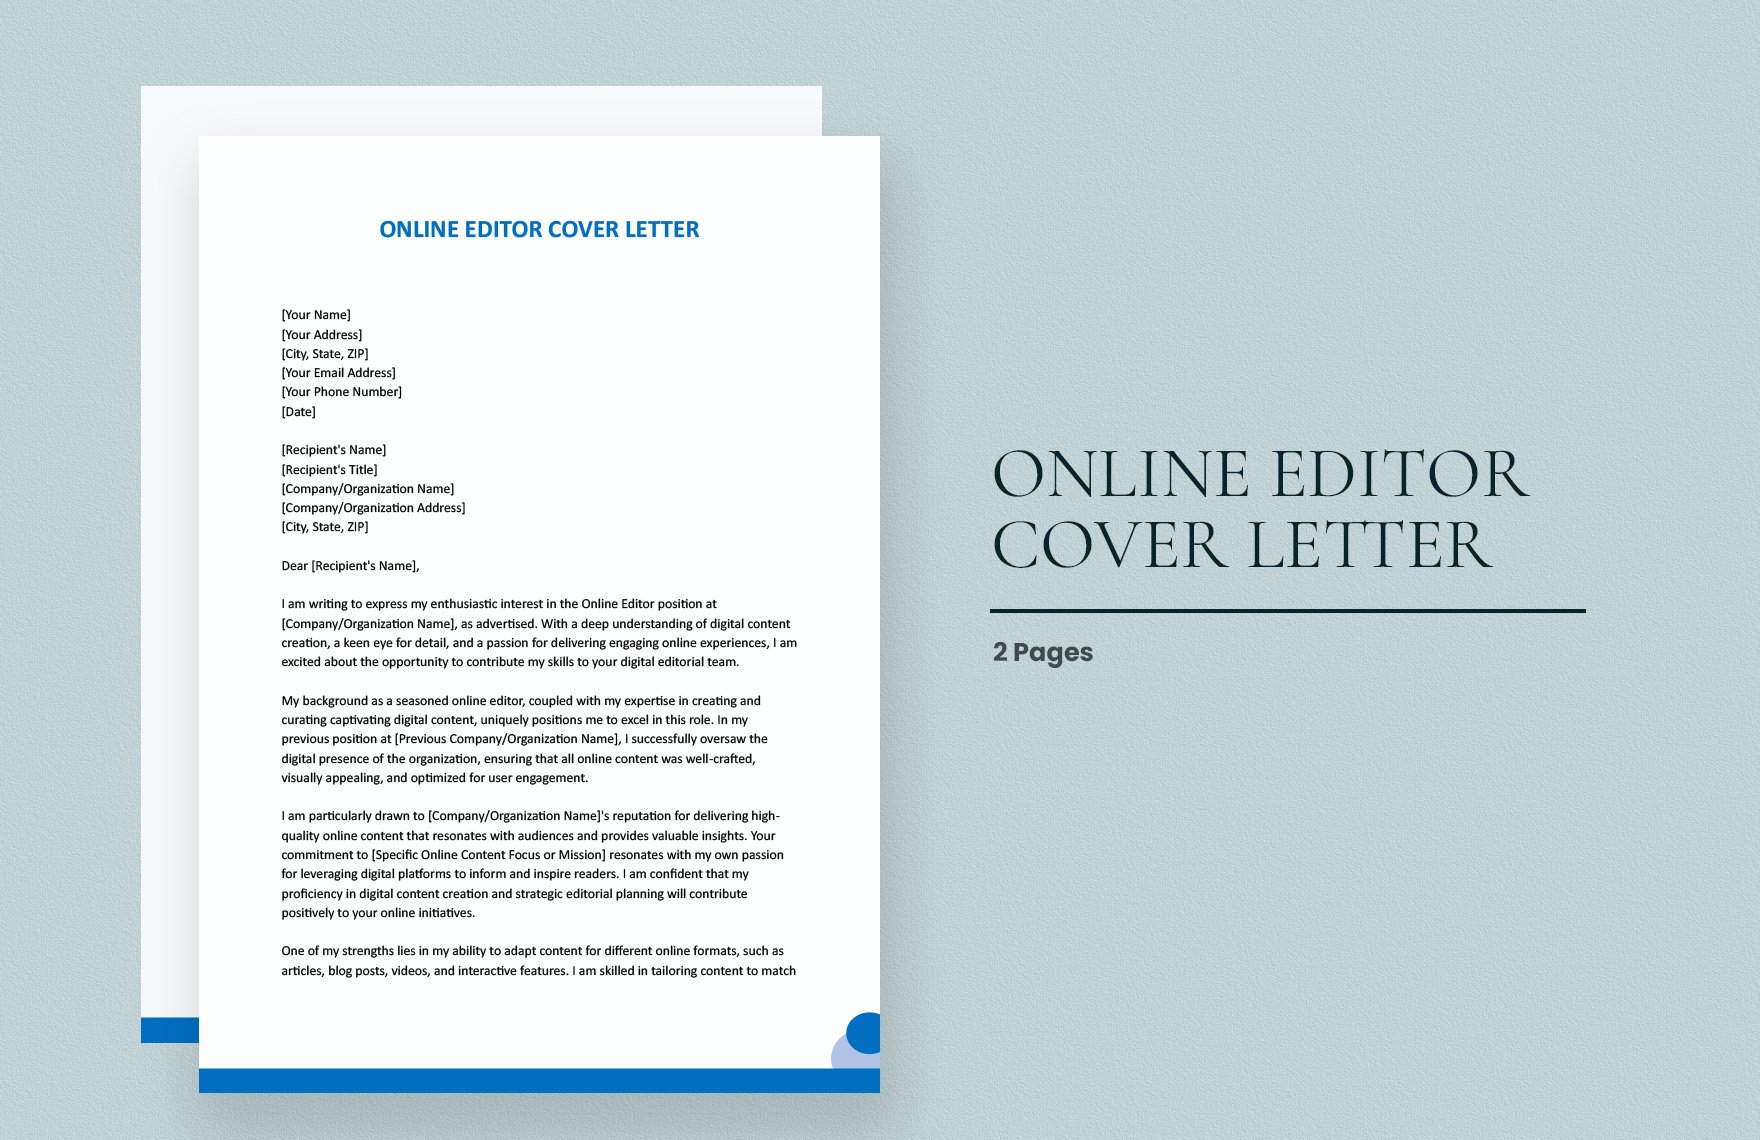 Online Editor Cover Letter in Word, Google Docs, Apple Pages